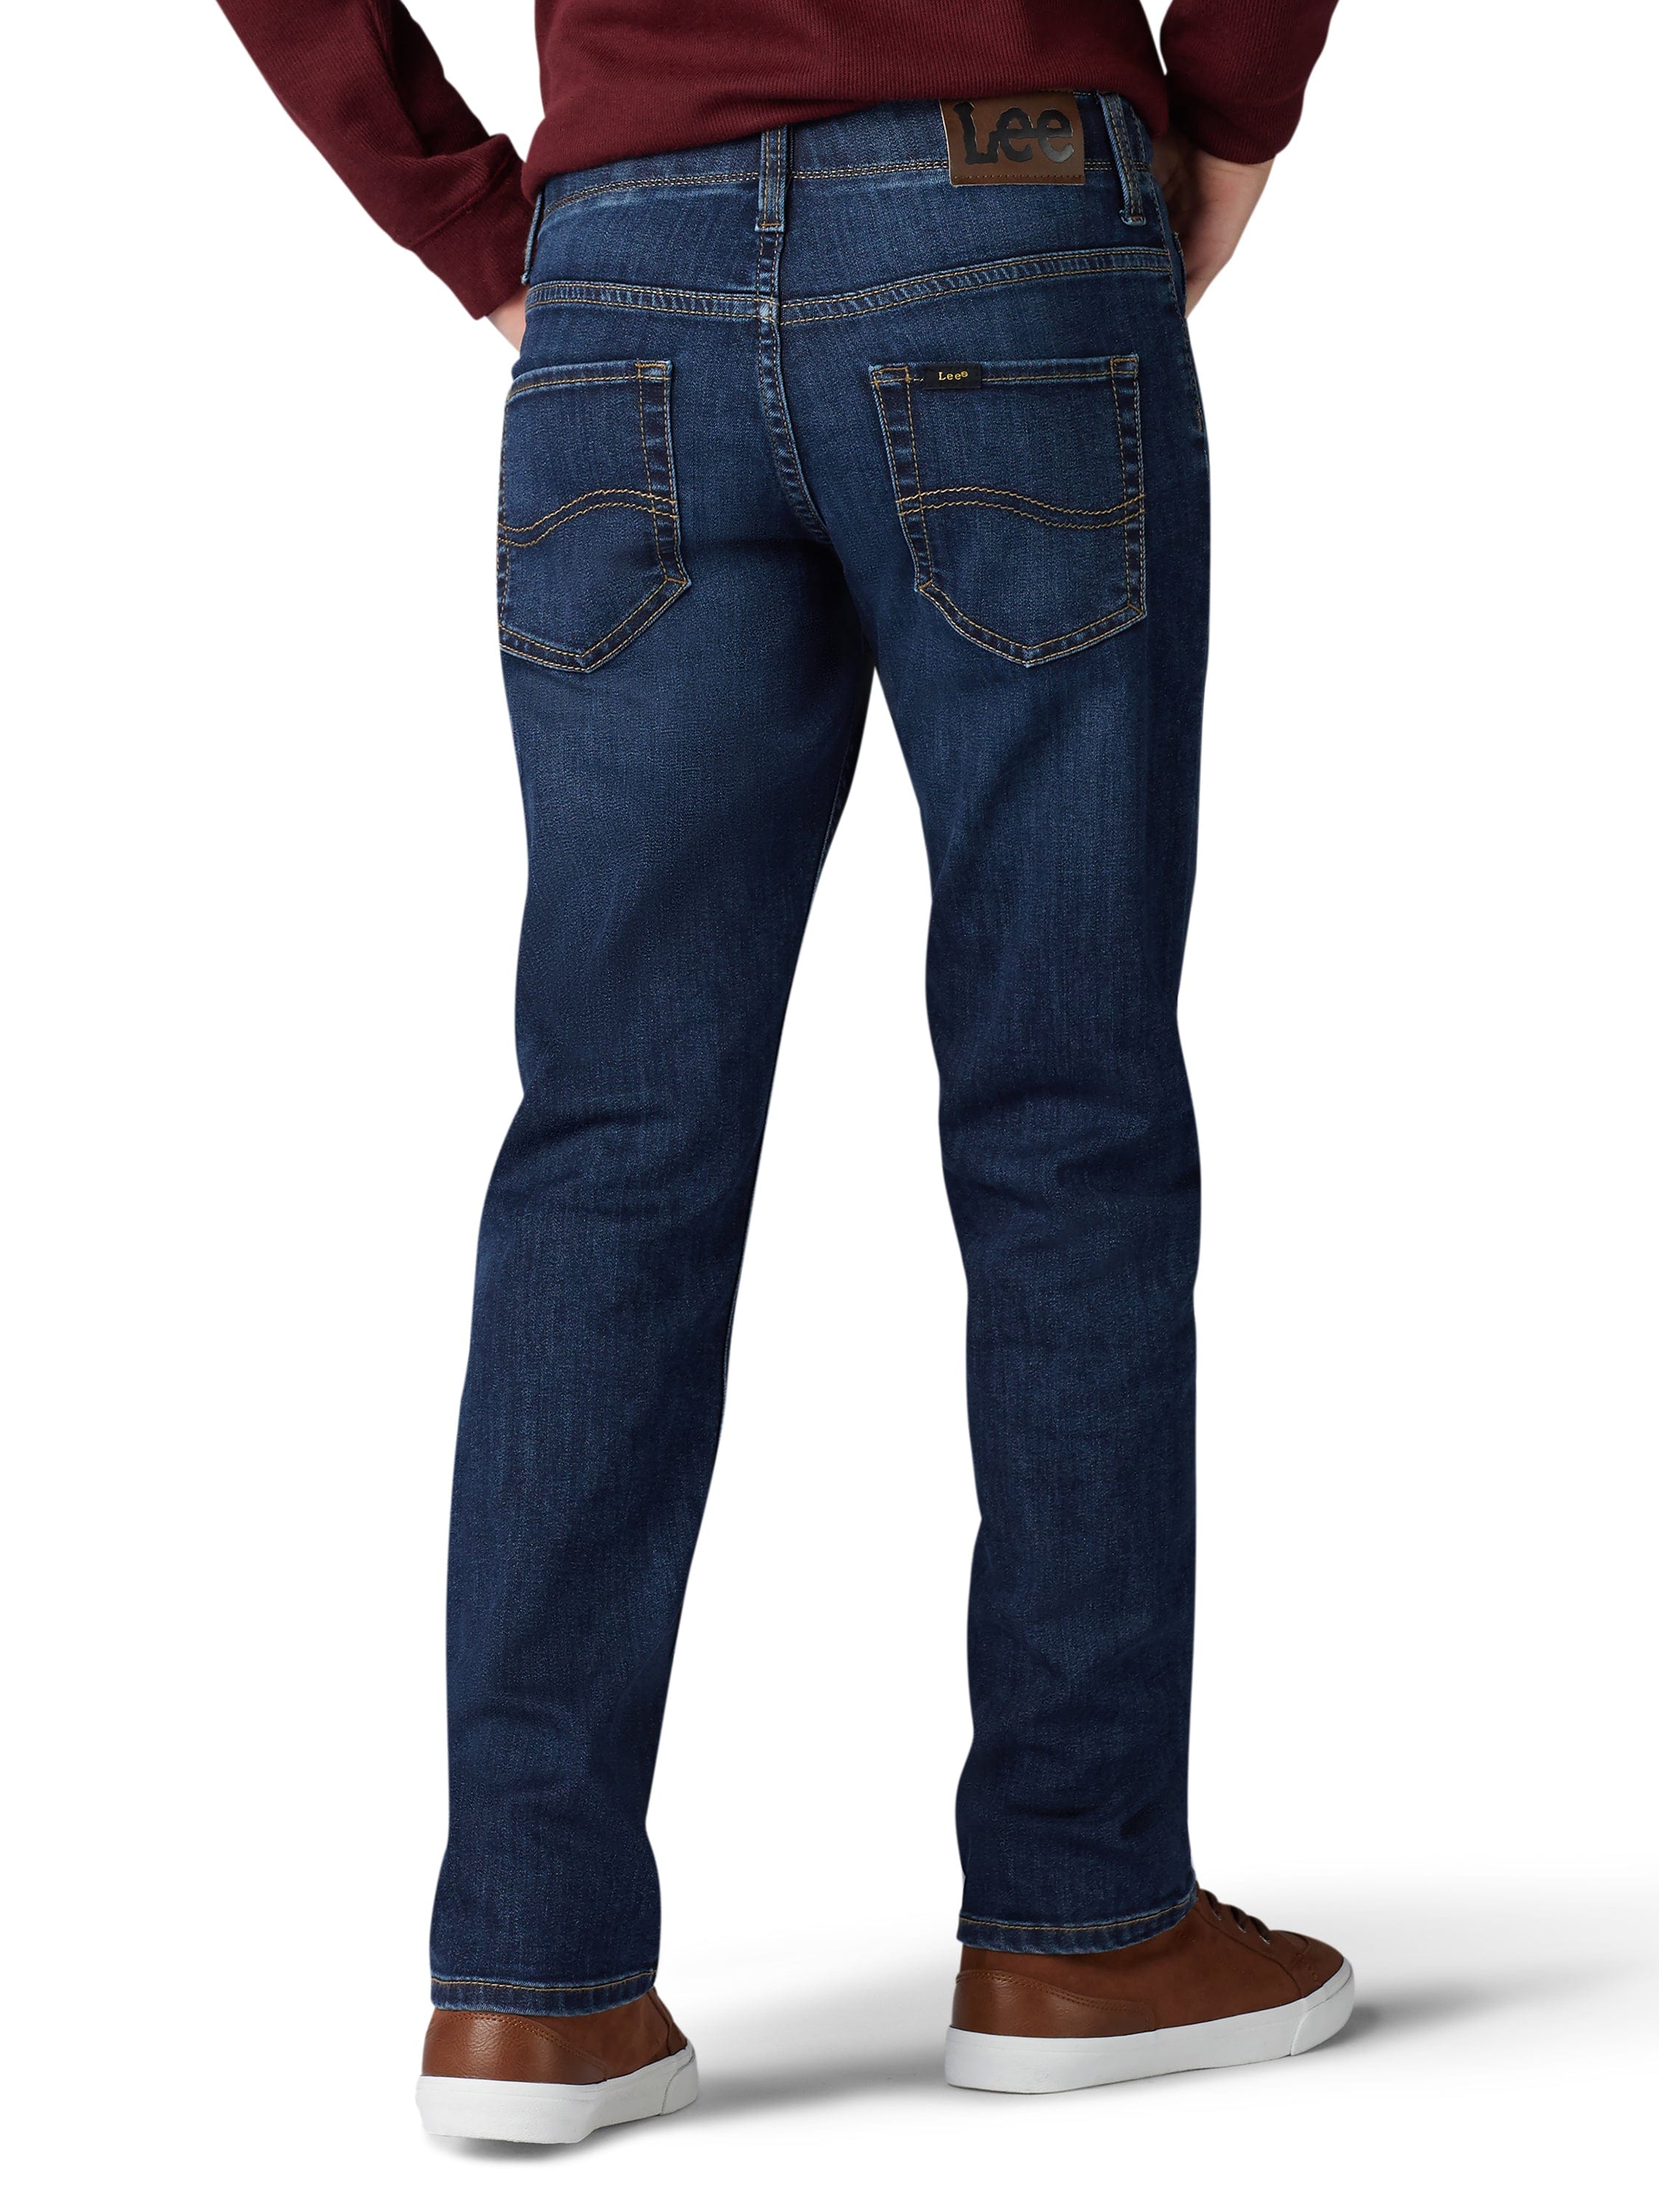 Lee boy's X-Treme Comfort Avery Straight Fit Tapered Leg Jeans 5258520 -  Russell's Western Wear,